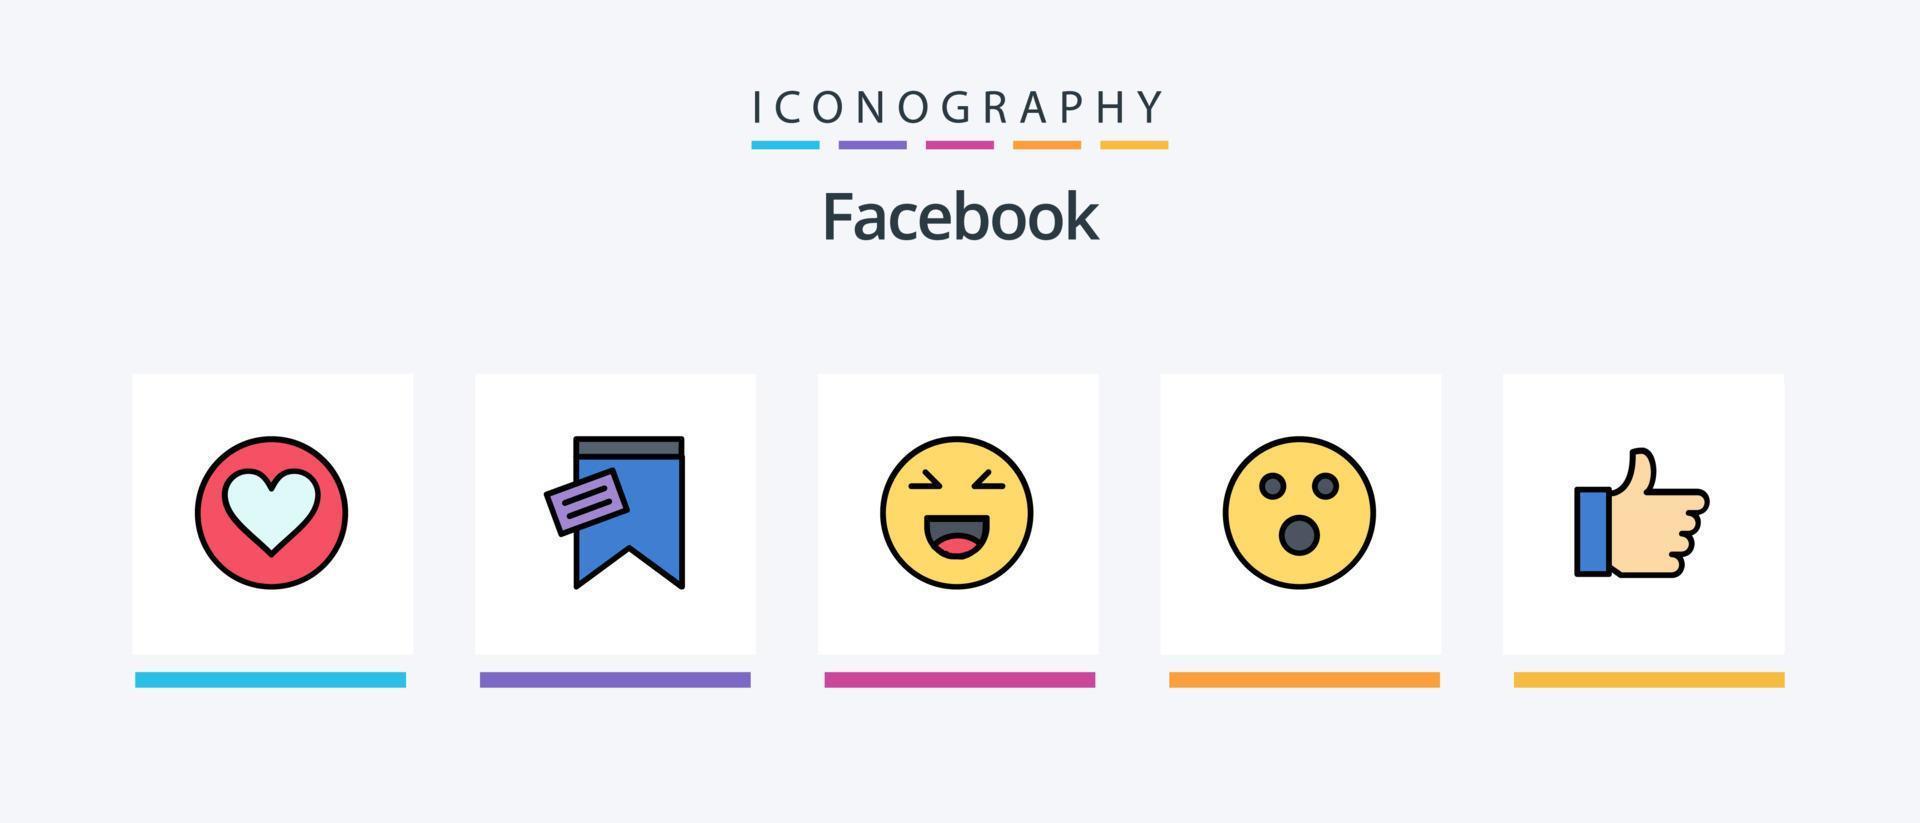 Facebook Line Filled 5 Icon Pack Including like. power. alert. chating. chat. Creative Icons Design vector